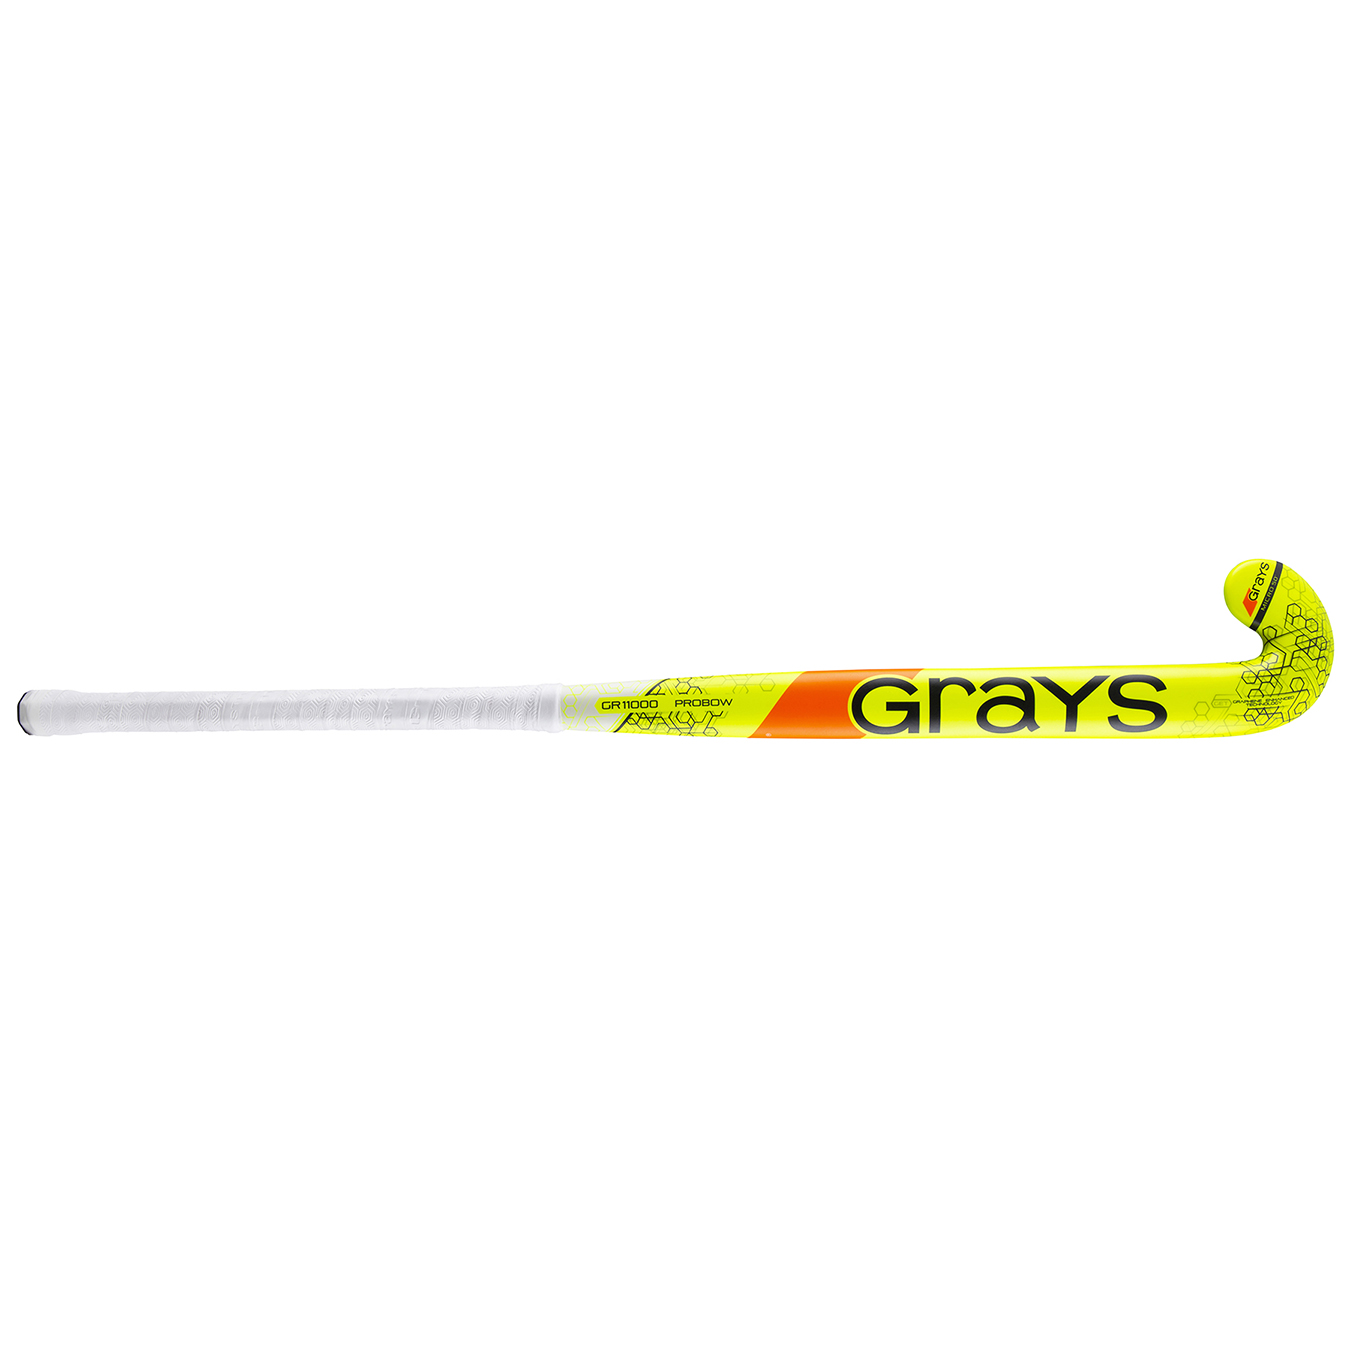 XG Sciences has supplied material for a range of field hockey sticks.